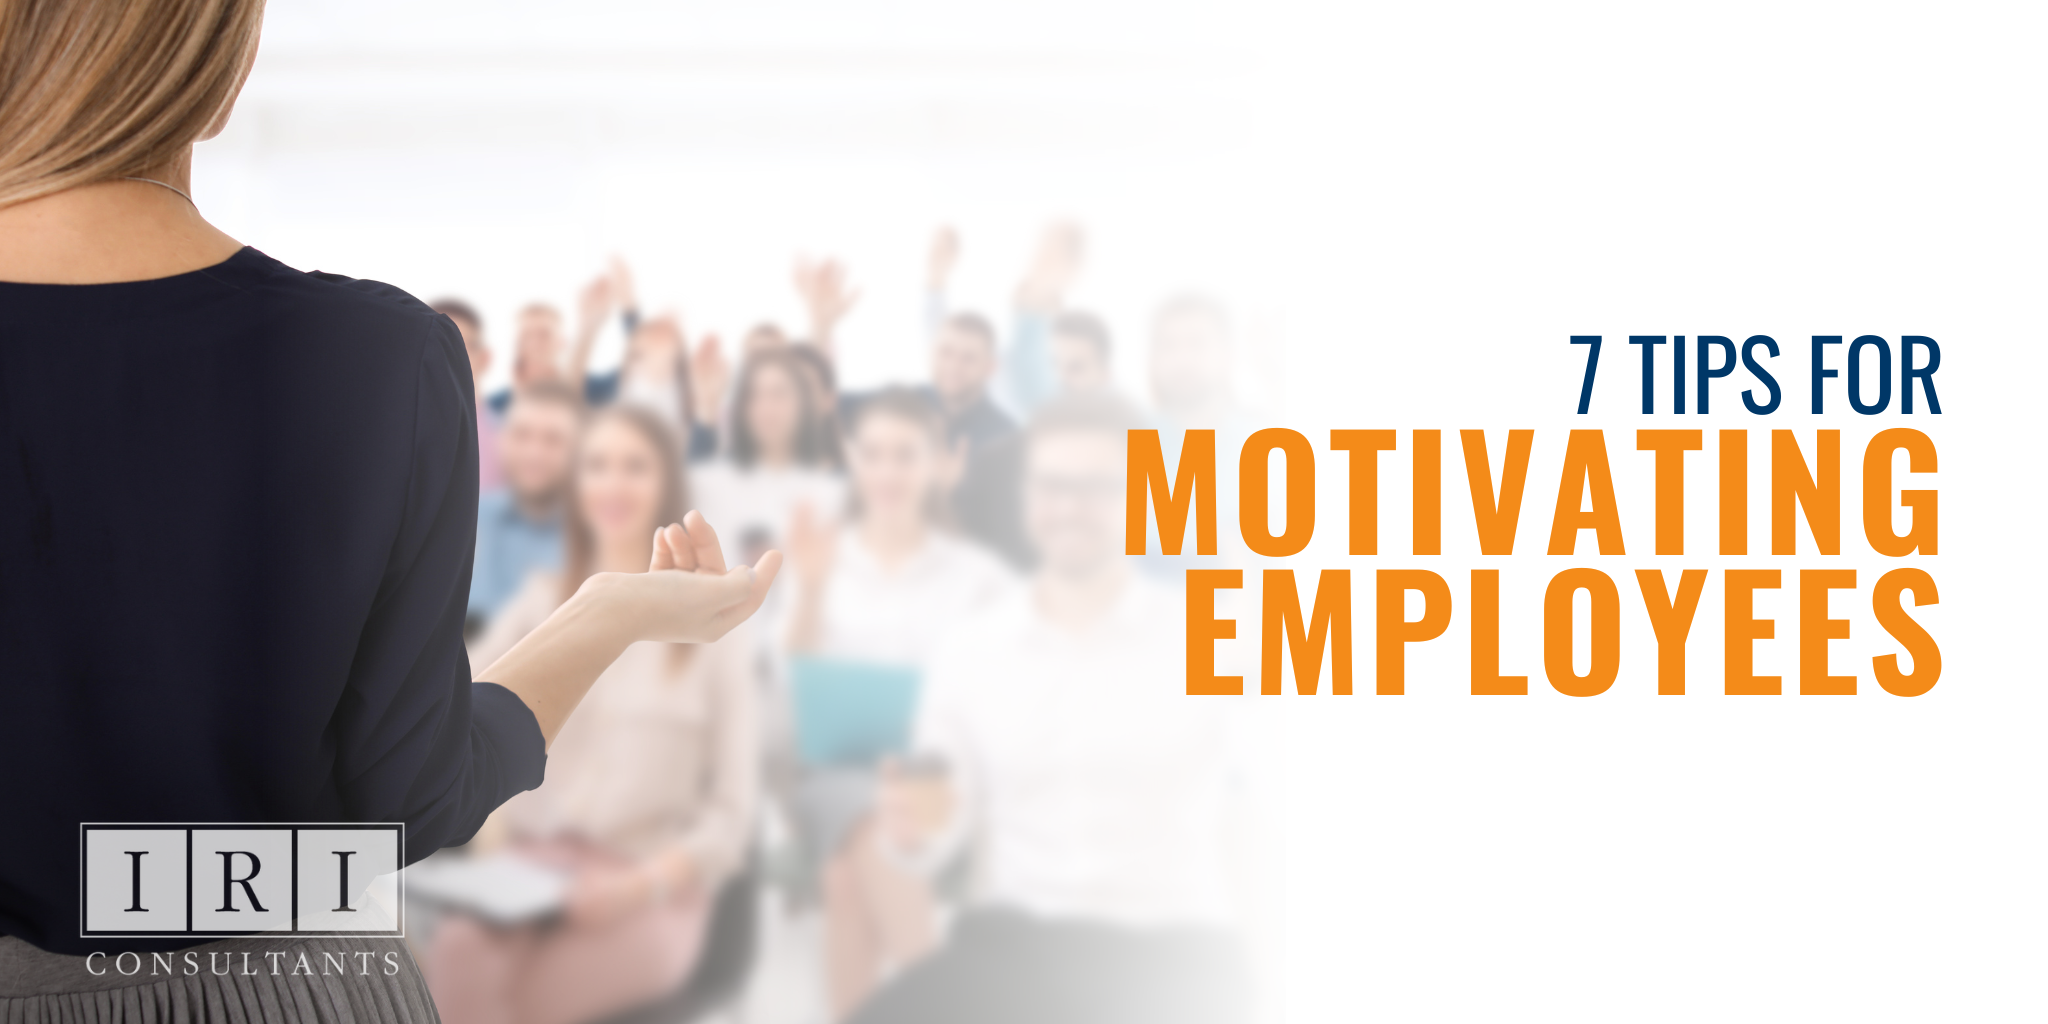 7 tips for motivating employees